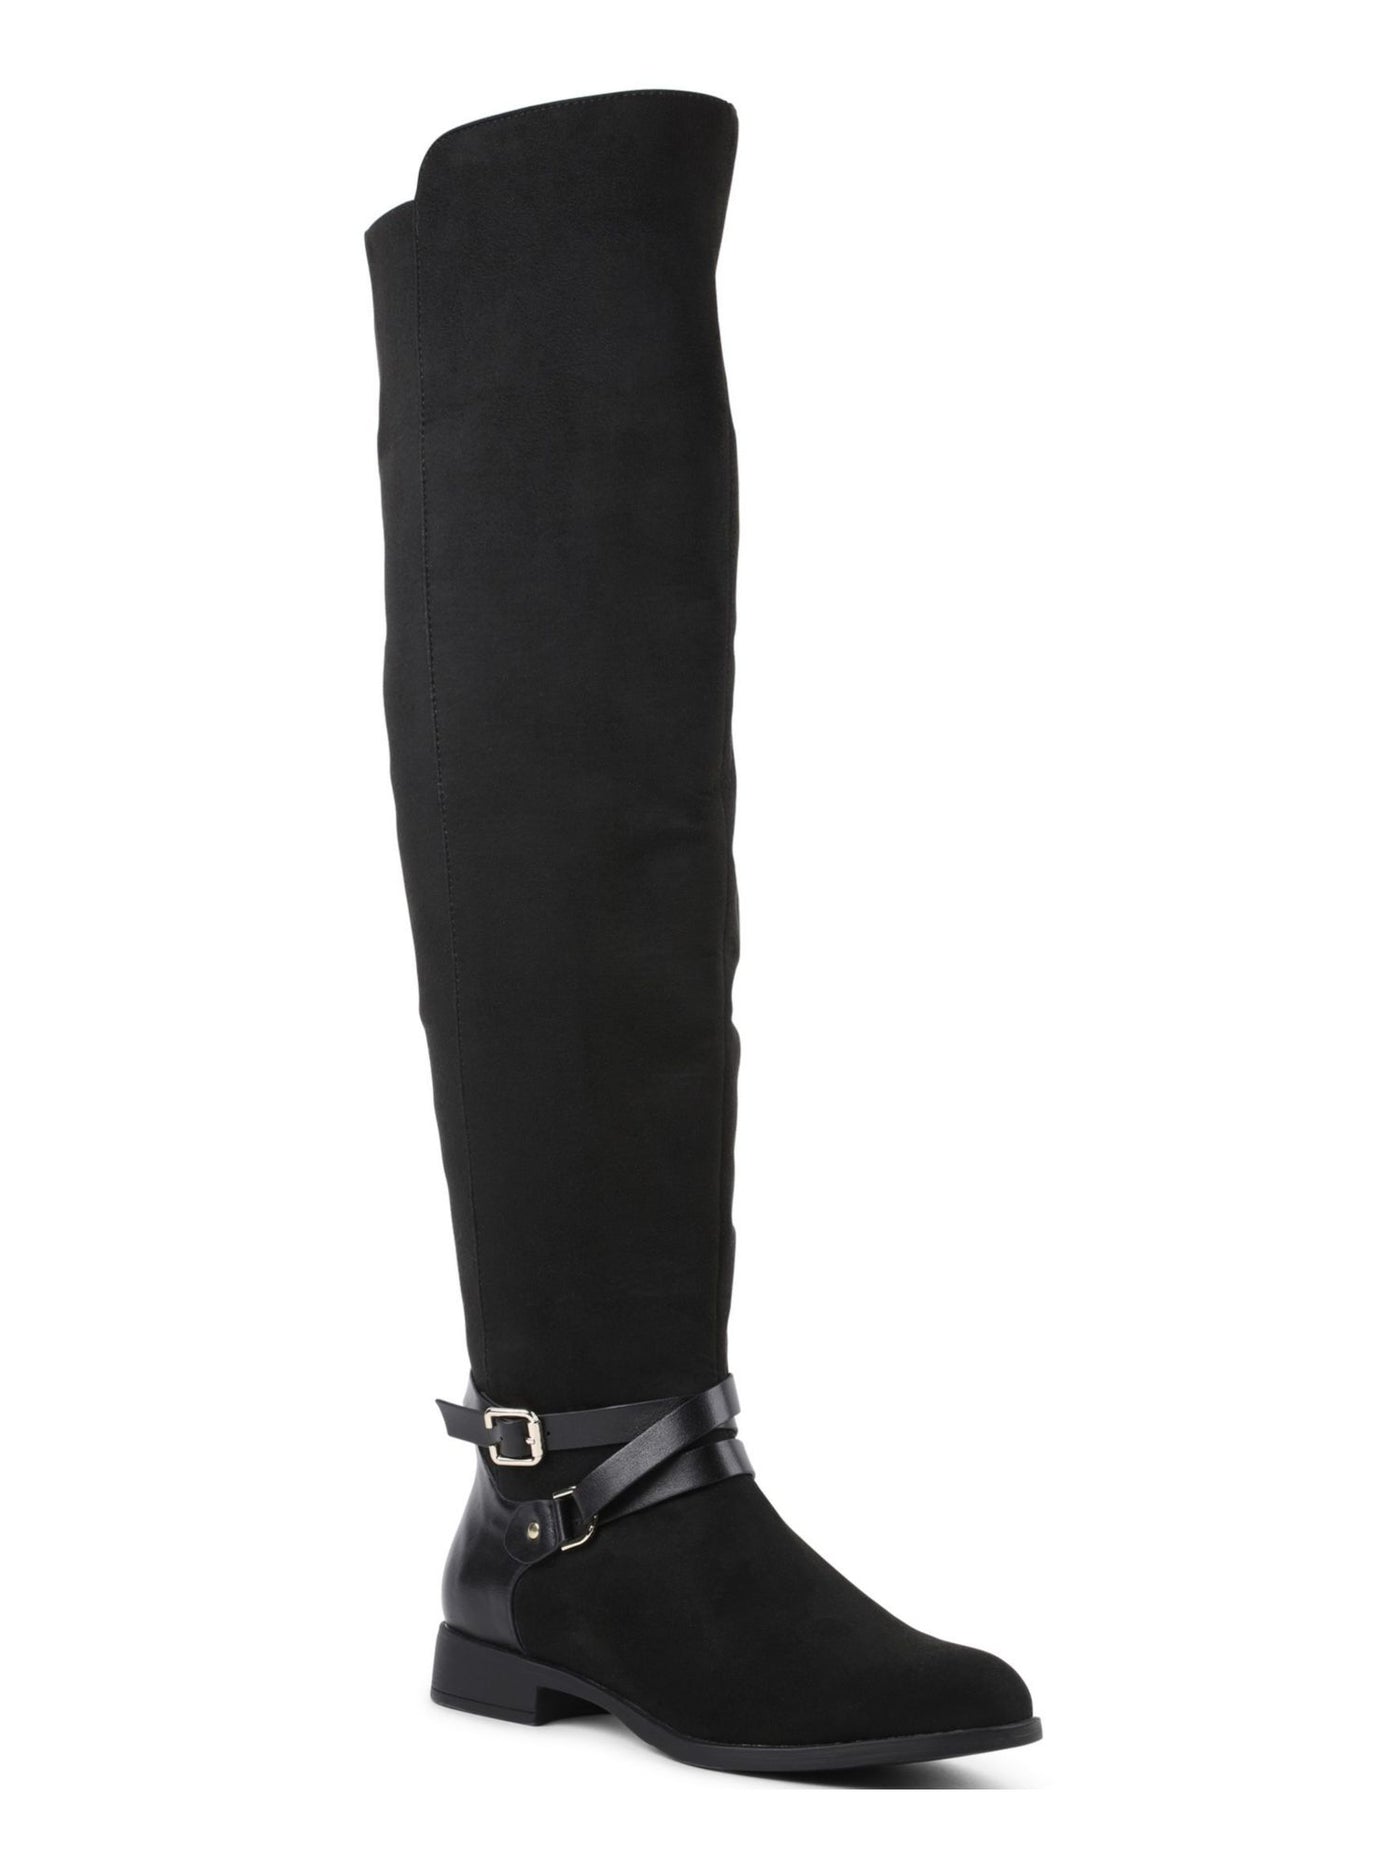 XOXO Womens Black A Line Gore Buckle Accent Cushioned Thames Almond Toe Block Heel Zip-Up Boots Shoes 9